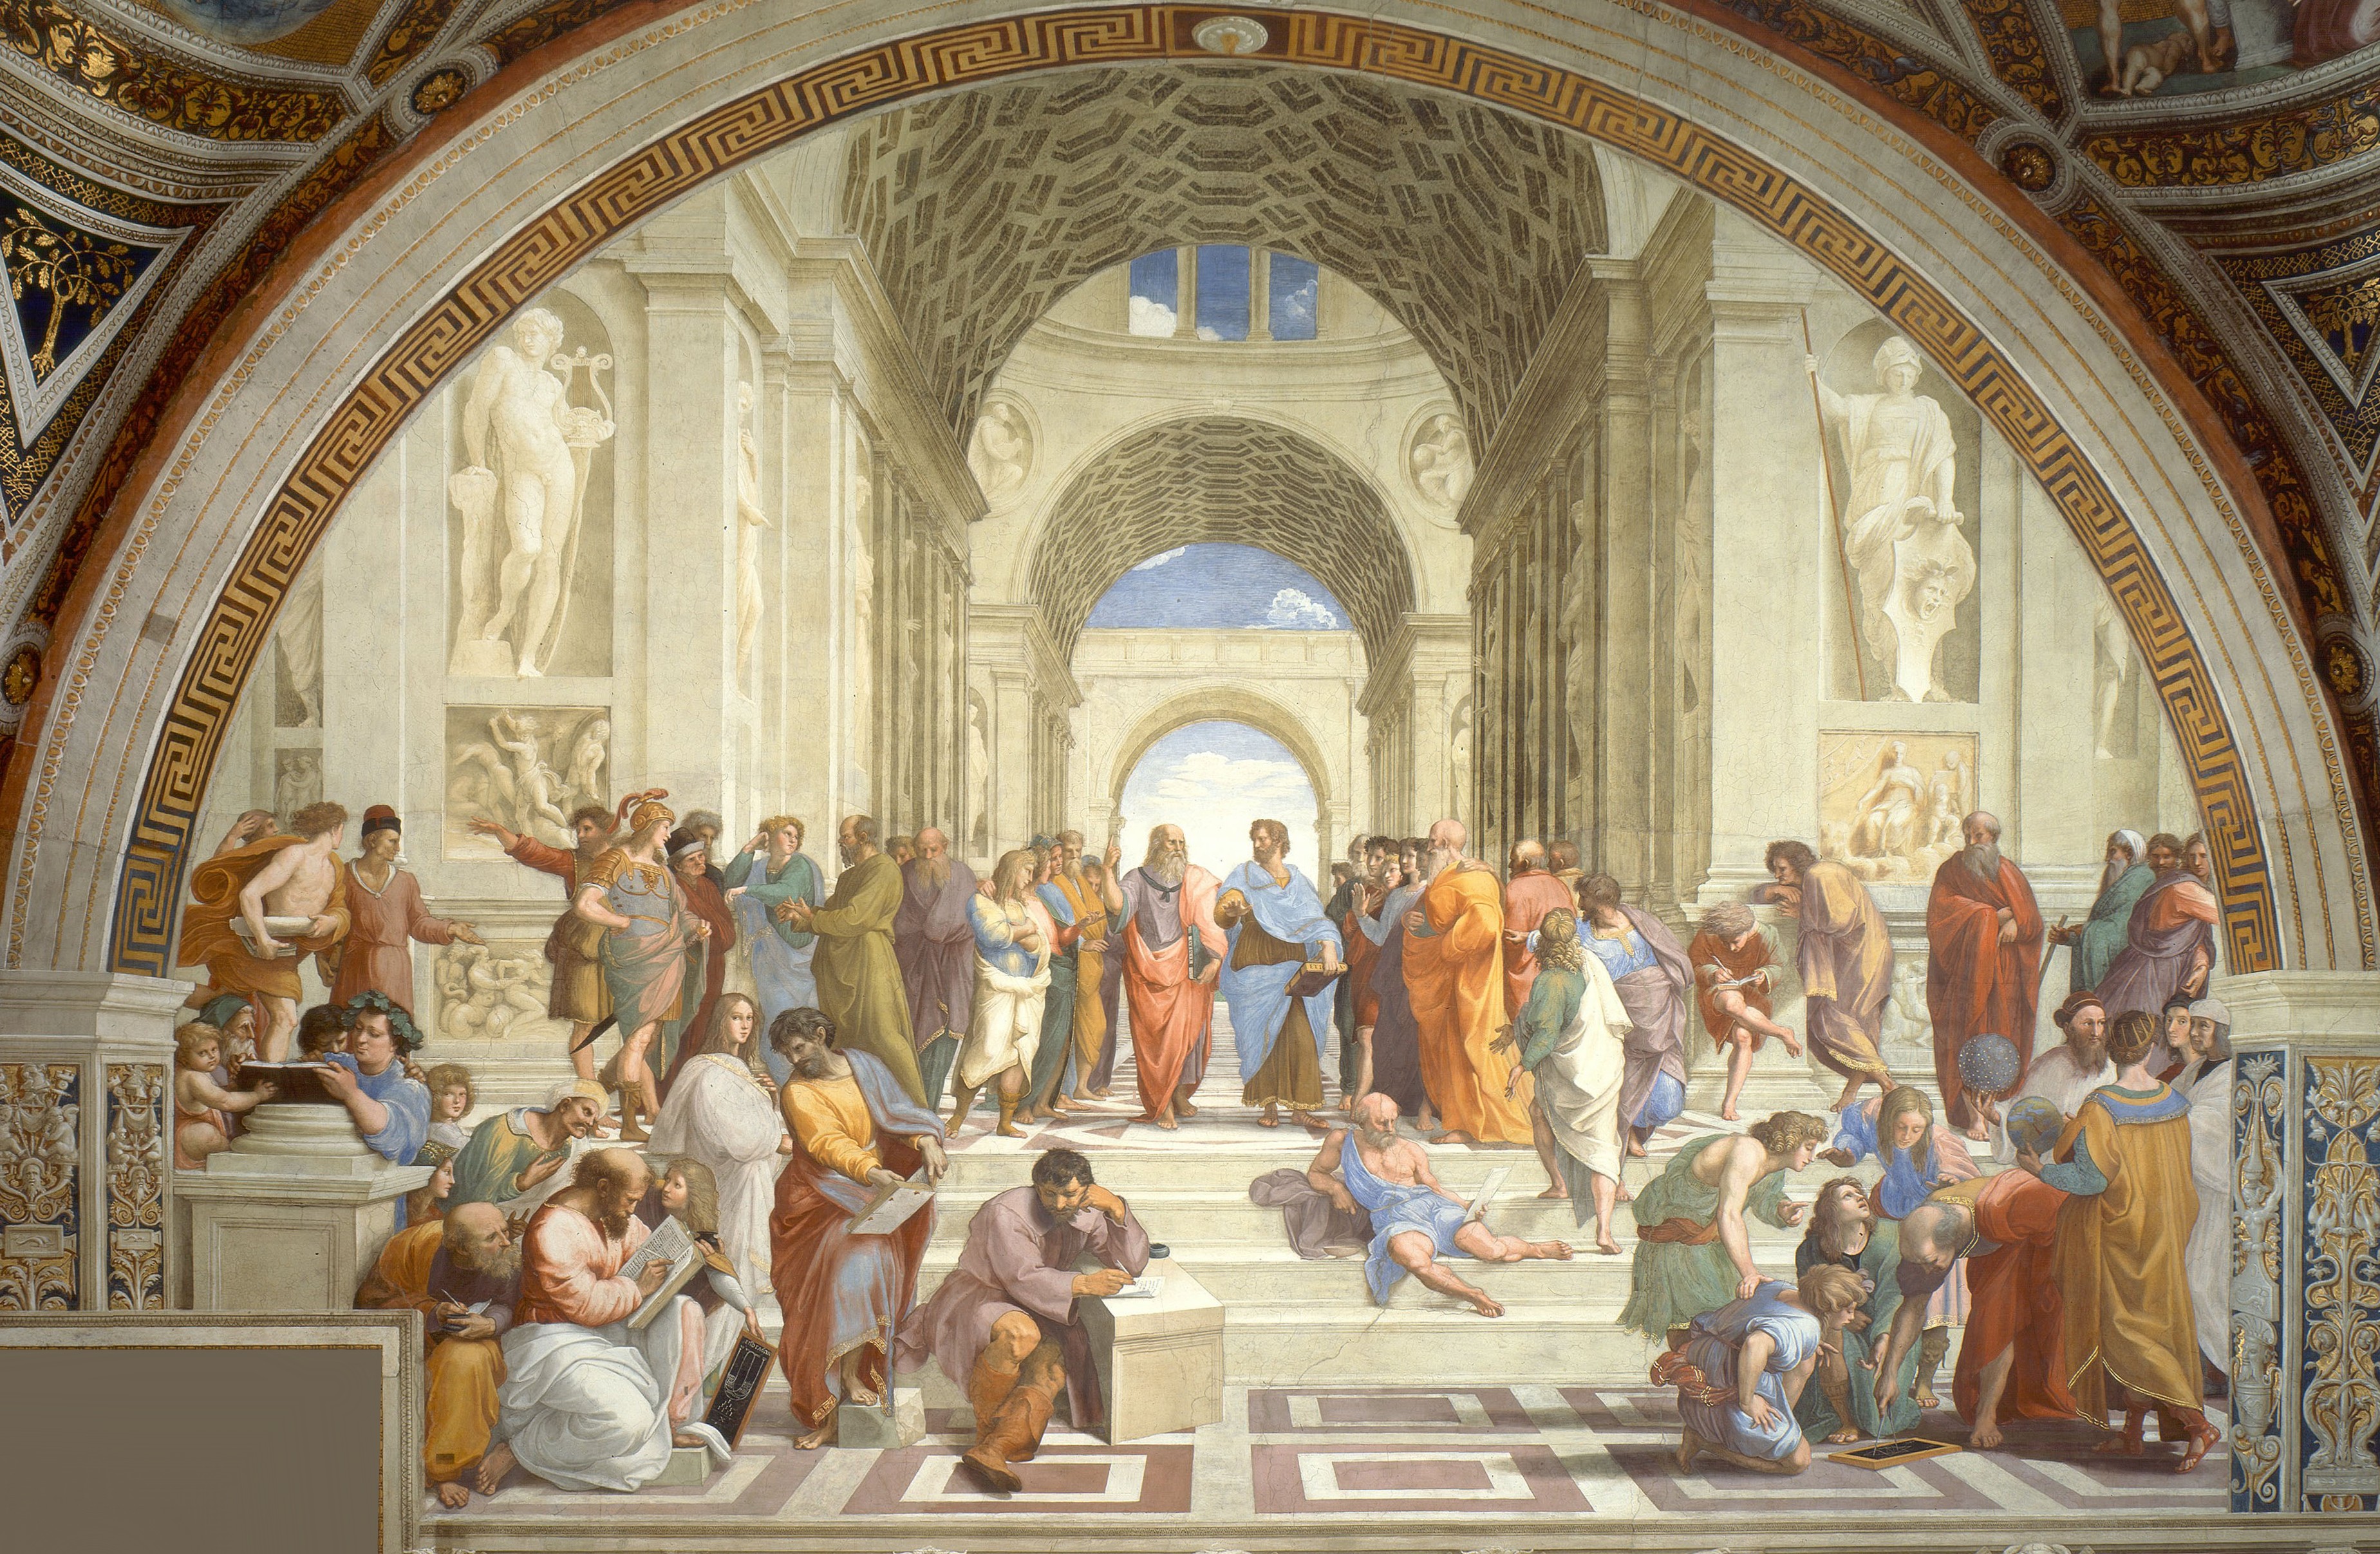 Socrates and Plato in a discussion at the School of Athens in Greece.